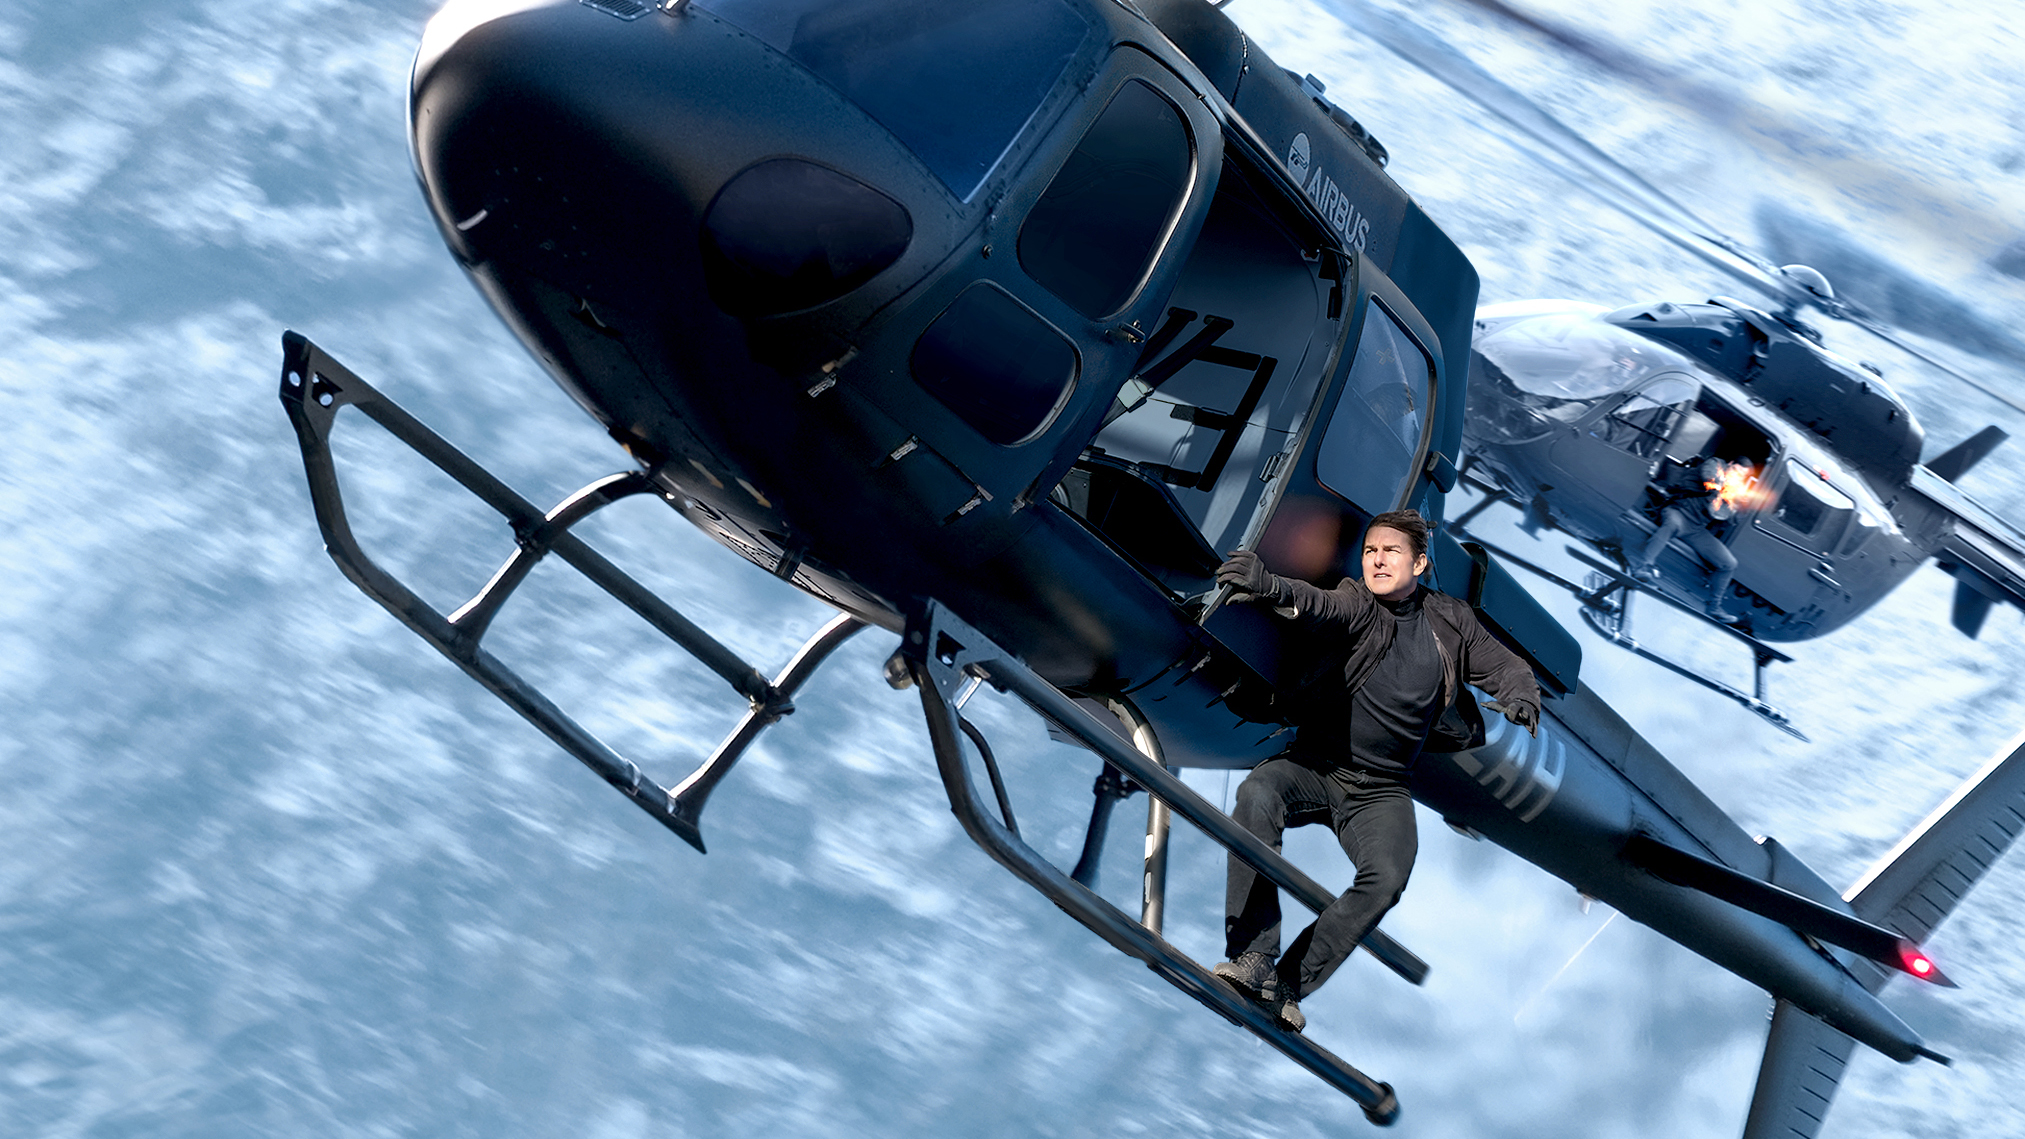 Mission Impossible 6 Helicopter - HD Wallpaper 